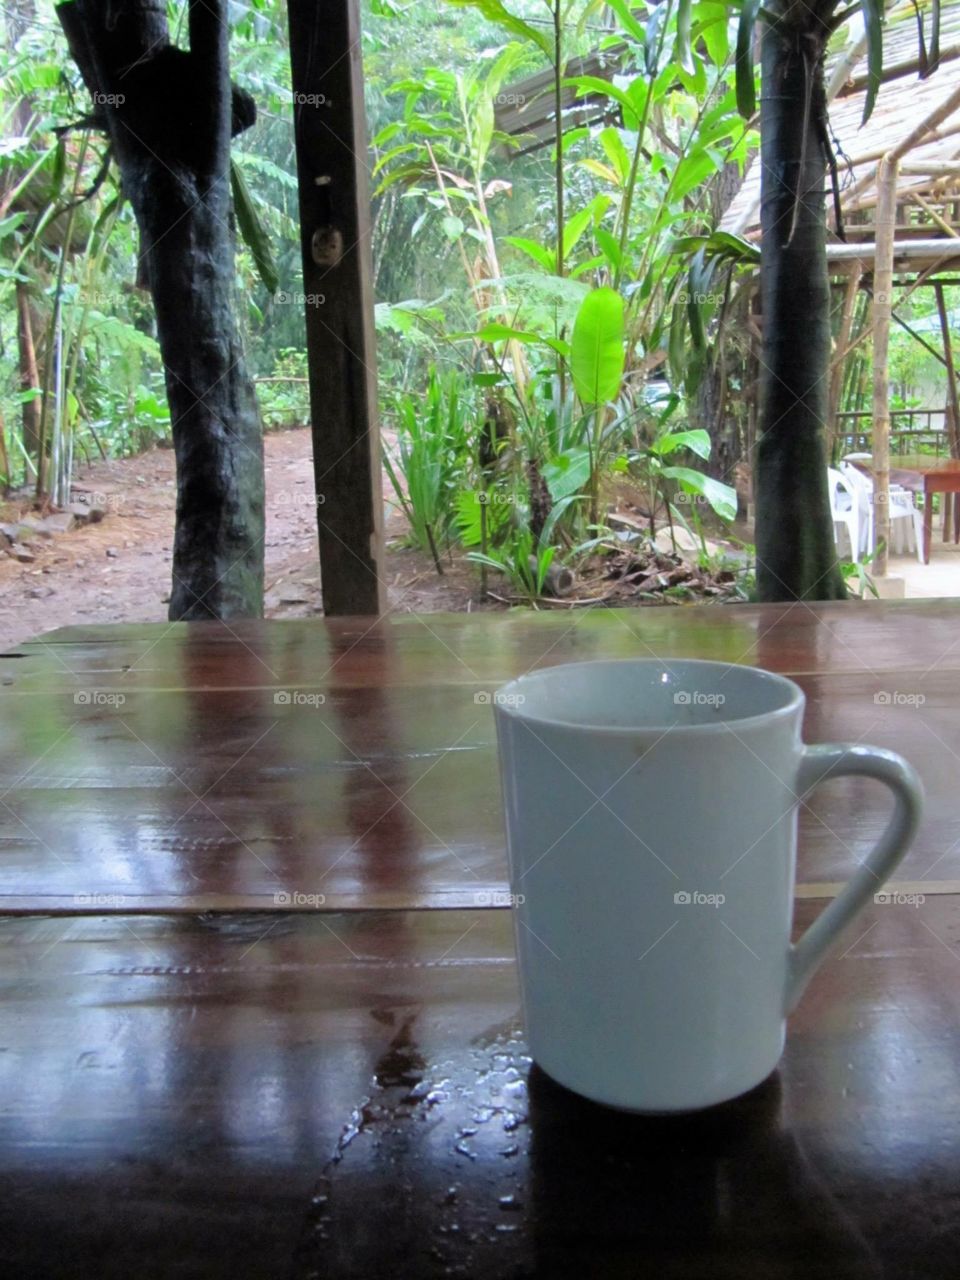 Enjoying a cup of coffee in the rainforest 